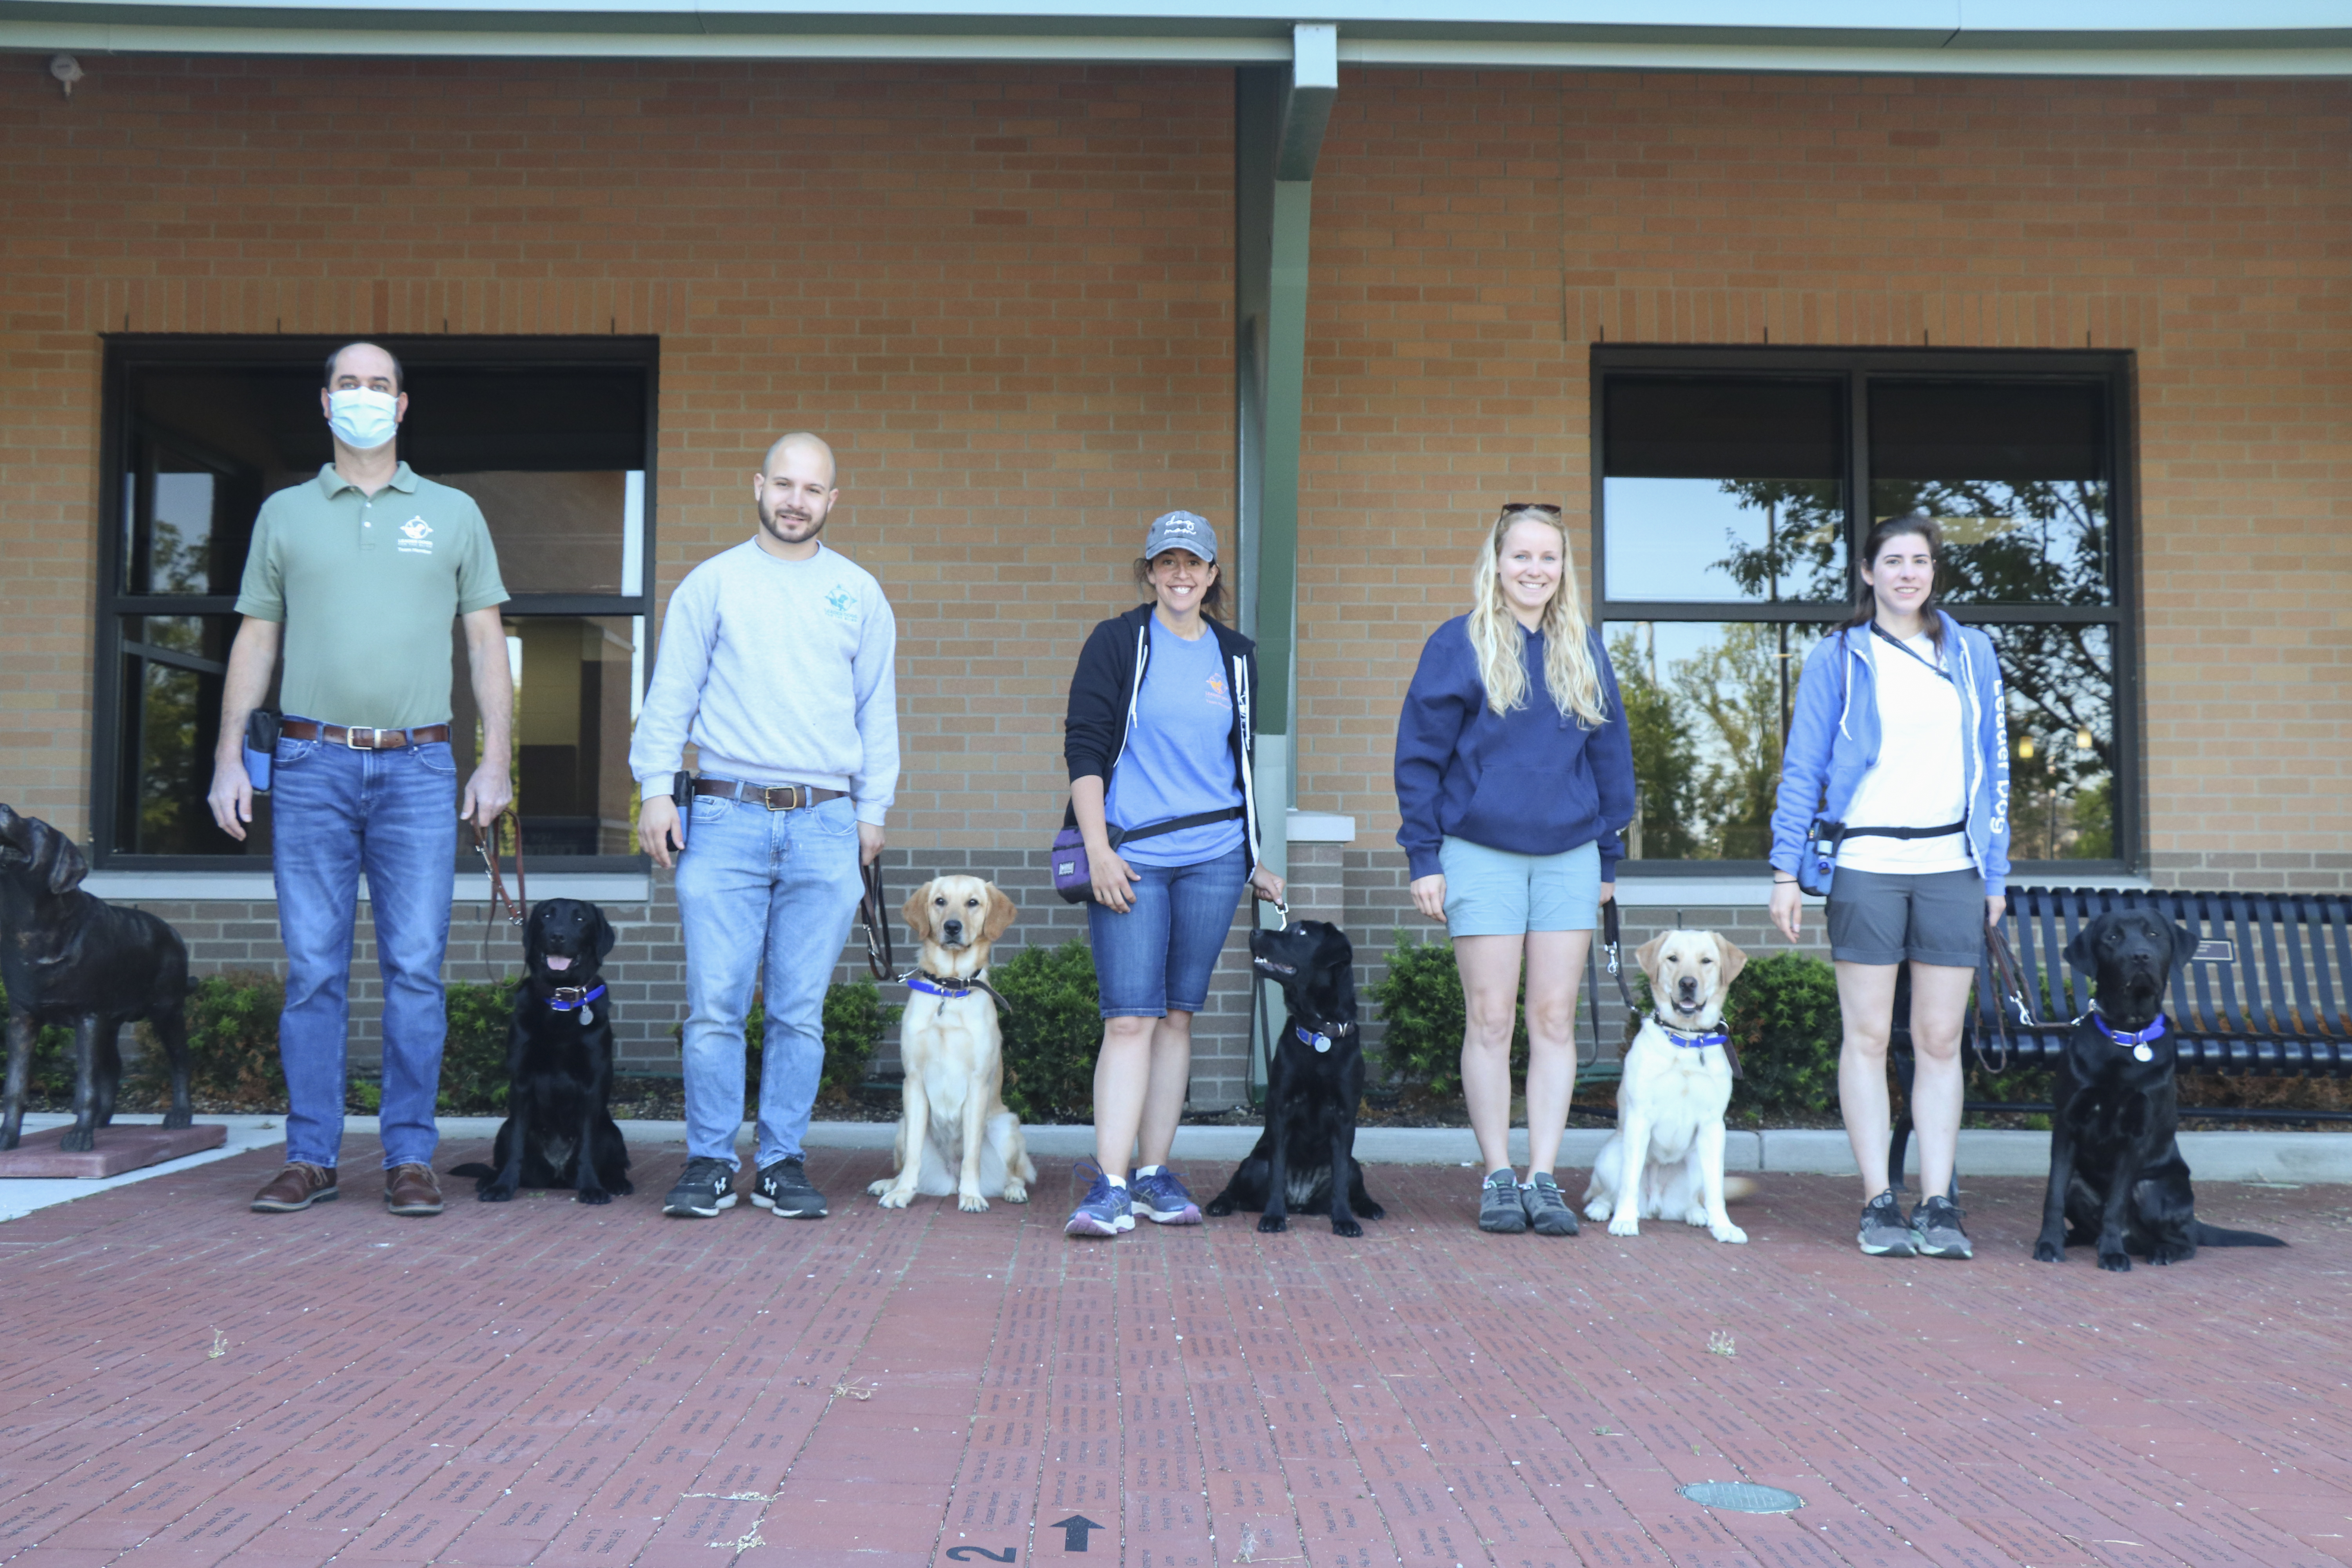 The dogs transported on June 1 to CNIB, from left to right, were Kiki, female Labrador retriever;  Rockette, female golden/Labrador retriever cross; Harper, female Labrador retriever; Nova, female Labrador retriever; and Quebec, male Labrador retriever. They are being handled by, from left to right, Jeff Stein, Leader Dog manager of canine care and Leader Dog Guide Dog Mobility Instructors David Linares, Alyssa Ozrovitz, Heidi Vollrath and Monica Swanseger.